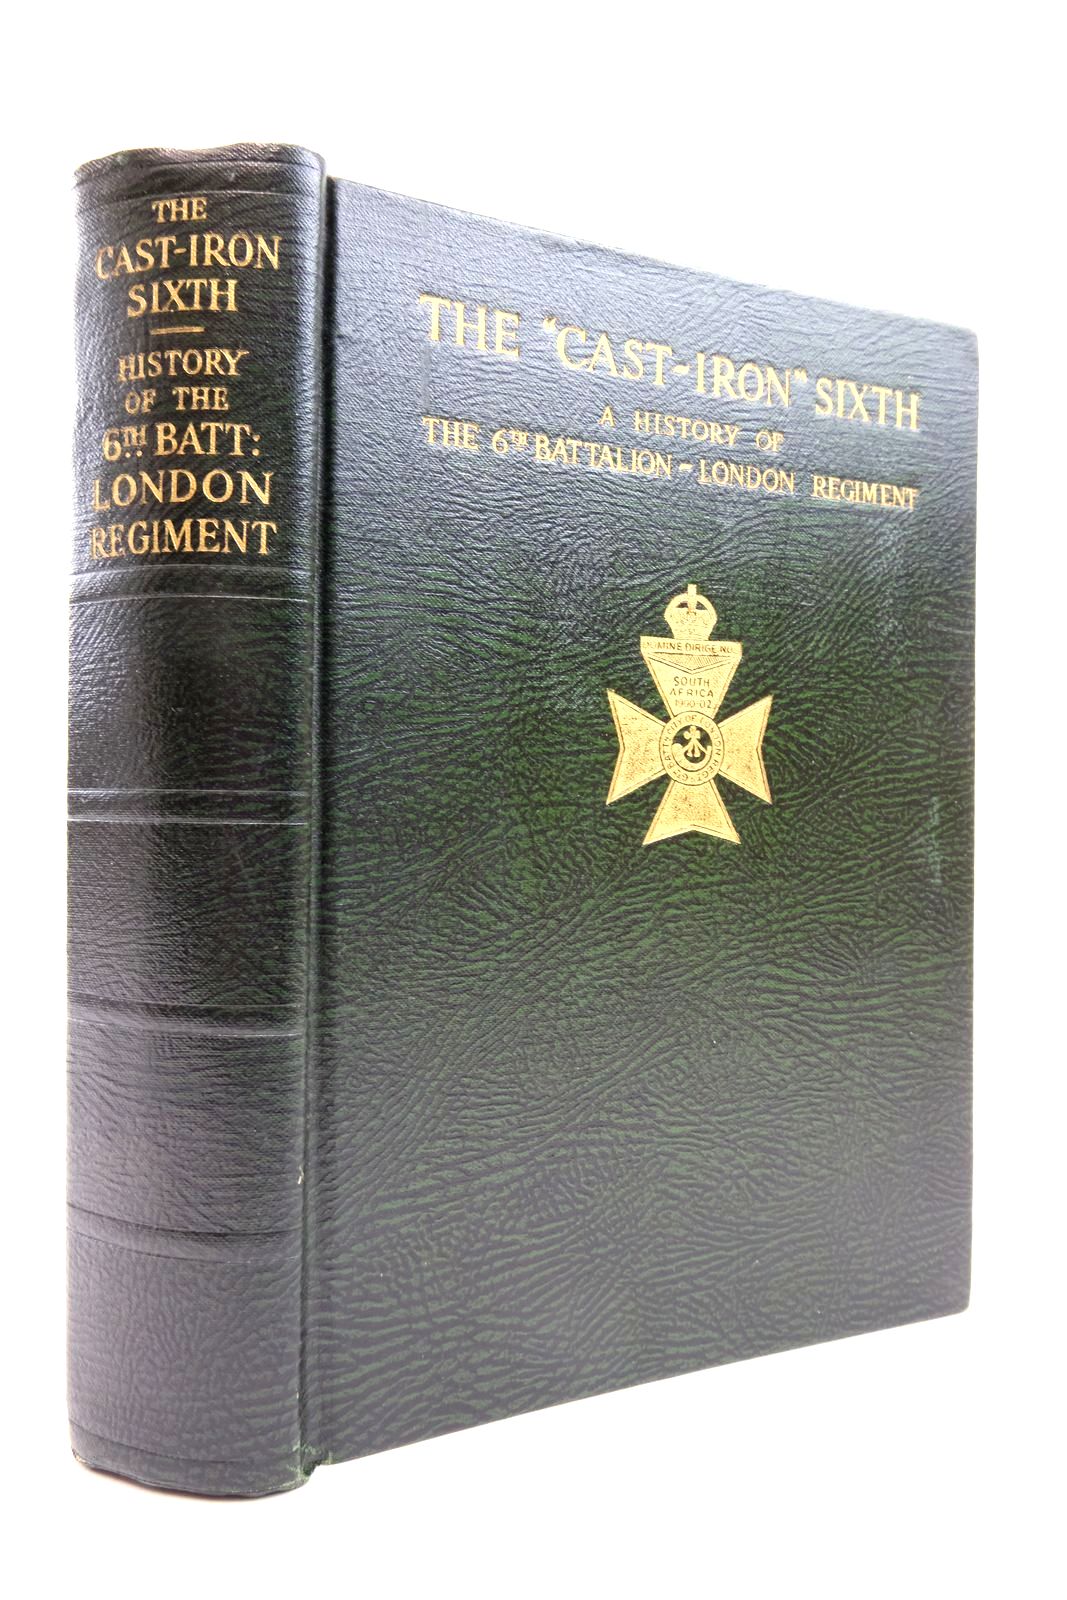 Photo of THE &quot;CAST-IRON SIXTH&quot;: A HISTORY OF THE SIXTH BATTALION LONDON REGIMENT (THE CITY OF LONDON RIFLES) written by Godfrey, E.G. published by F.S. Stapleton, Old Comrades Association (STOCK CODE: 2137377)  for sale by Stella & Rose's Books